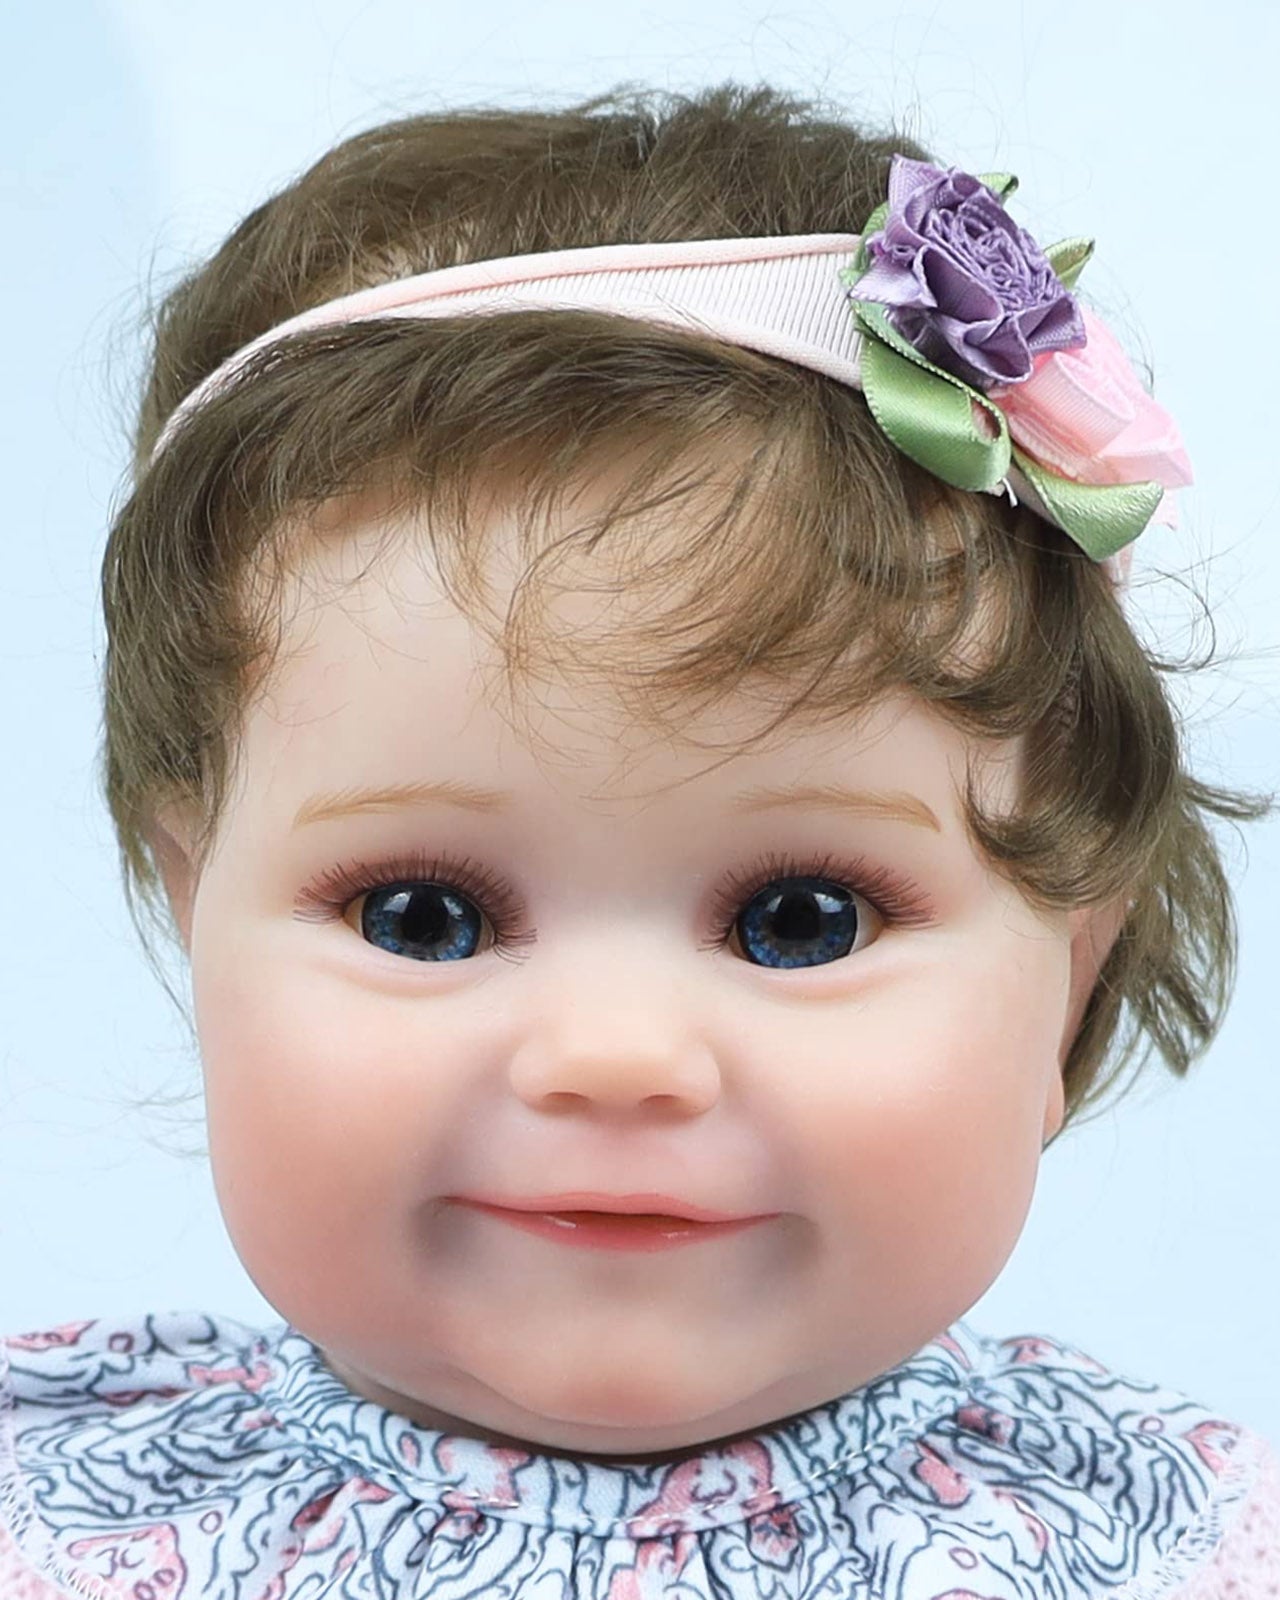 Hayden - 20" Reborn Baby Dolls Realistic Sweet Smile Toddlers Girl with Soft Vinyl Silicone Full Bod